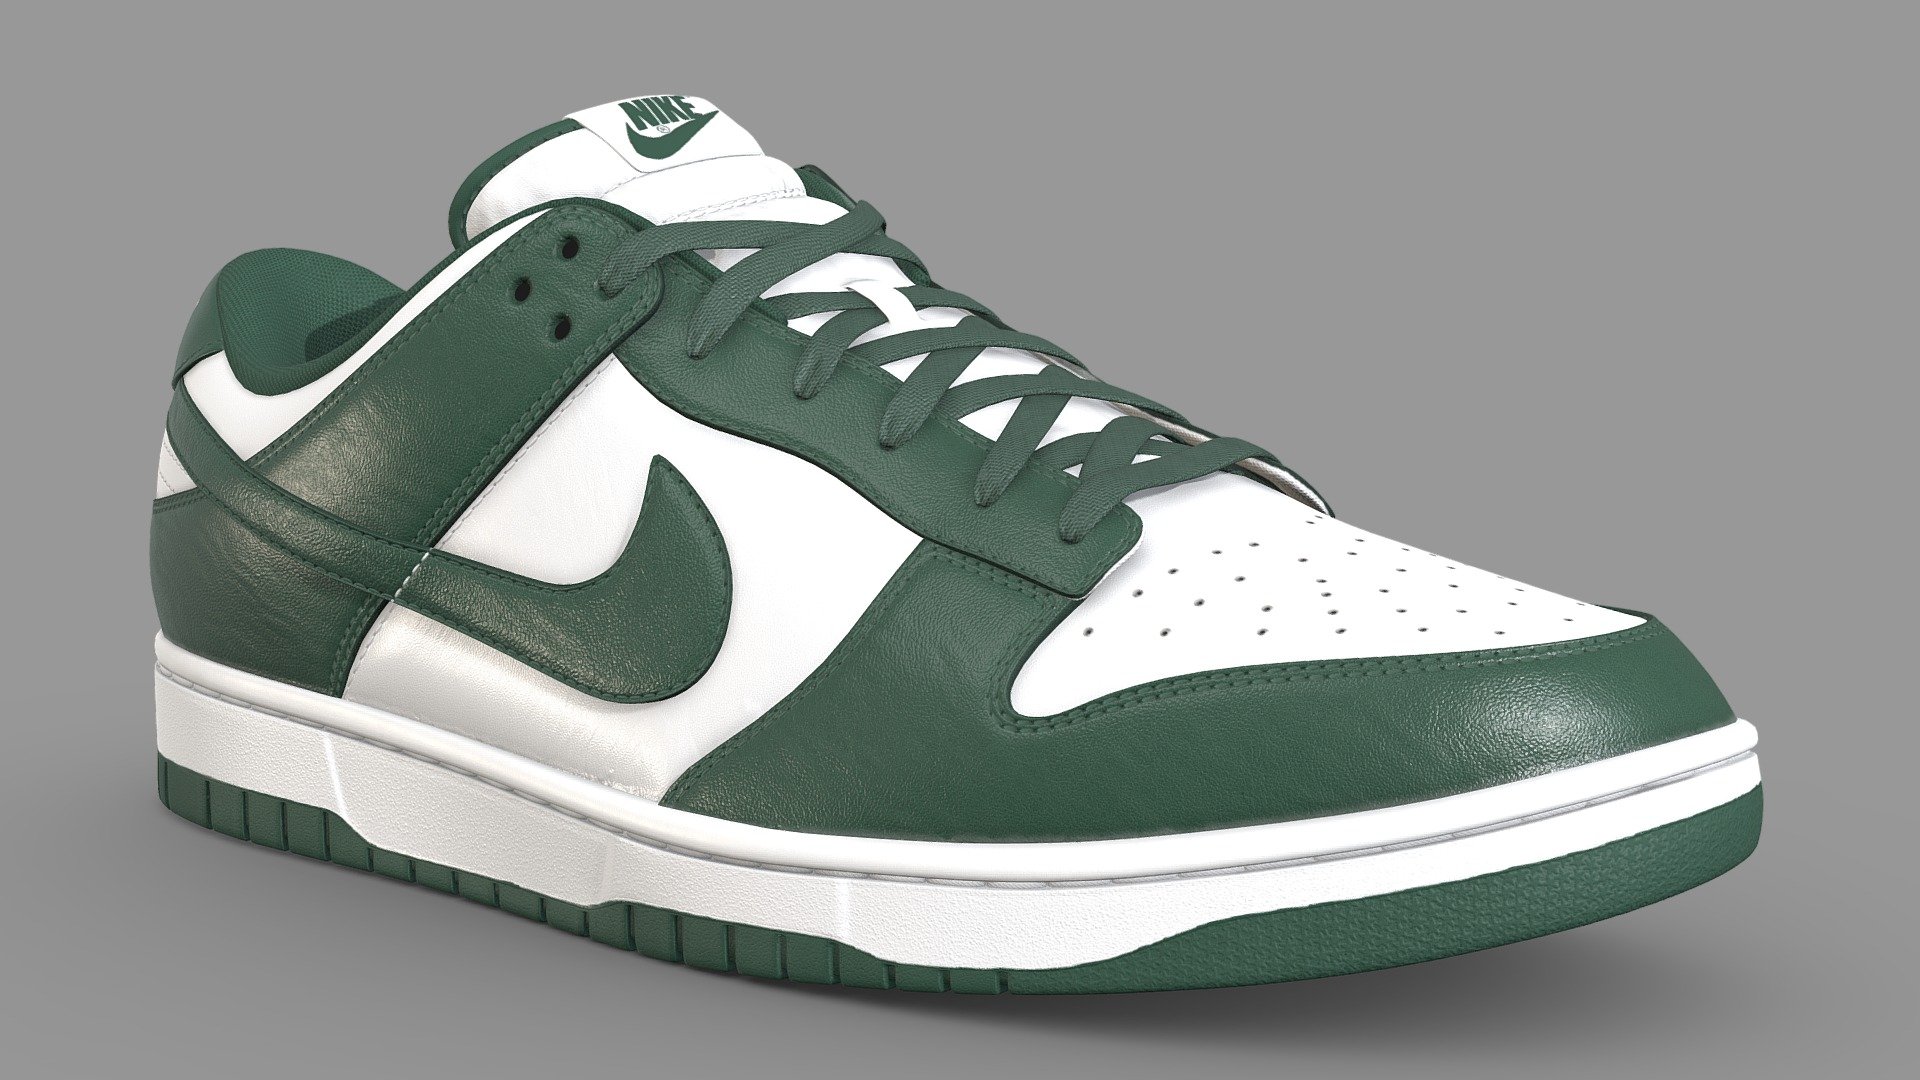 Nike Dunk Low in the Michigan State Colourway. Every detail was made in the recreation of this shoe, from the text on the medial side of the shoe to the subtlety of each material, nothing went overlooked. Stitches were sculpted by hand to achieve the highest quality

What's included


Blender file with linked textures
FBX and OBJ versions
OneMesh version
All 4k textures

Model Features

The upmost care went into crafting this model. As a result it is subdivision ready. The model was unwrapped with efficiency in mind. Both left and right shoes are mostly identical, save for logos and text that cannot be mirrored. As such the high detail version of the shoe uses 4 UV maps to cover both of the shoes, with the One mesh version using just the one UV map 3d model